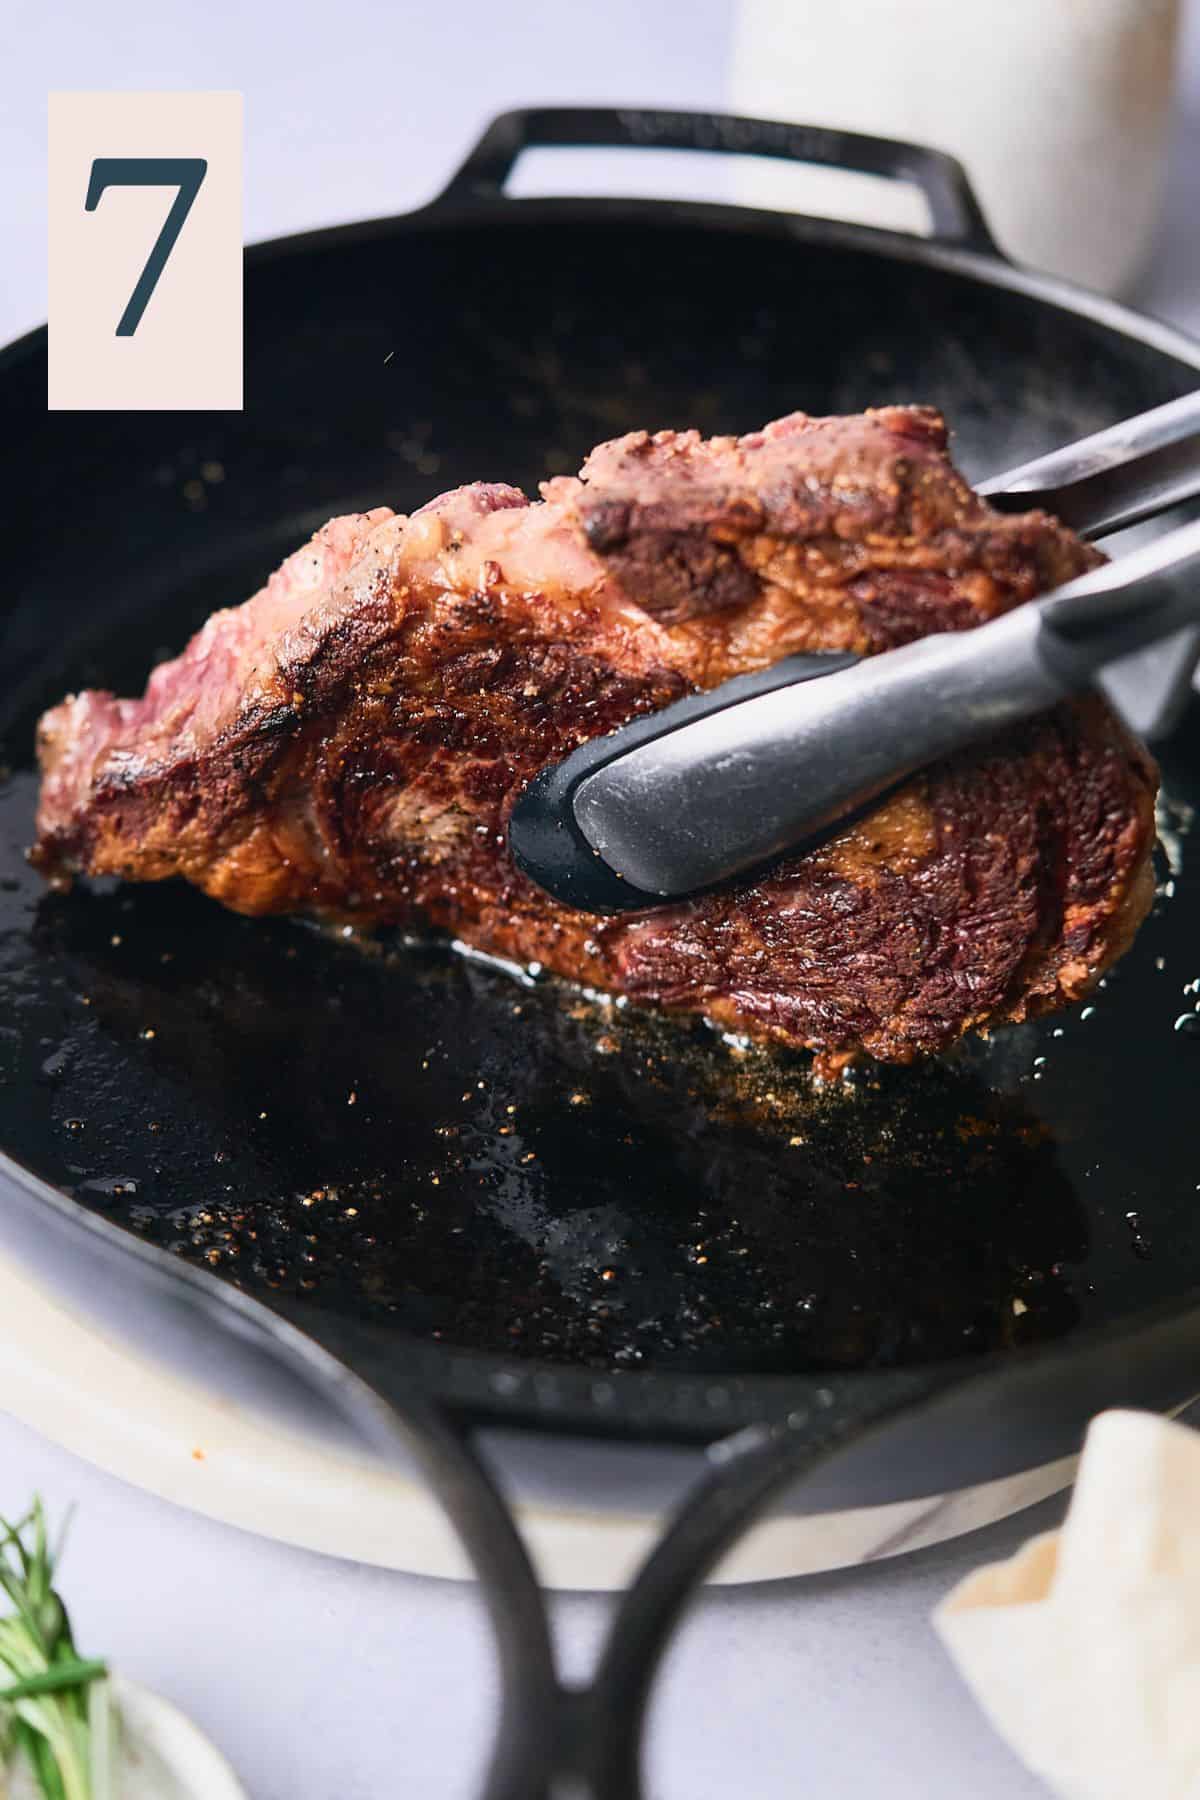 Tongs holding up a ribeye steak on one side to cook the fat cap and other uncooked parts of the side of the steak. 